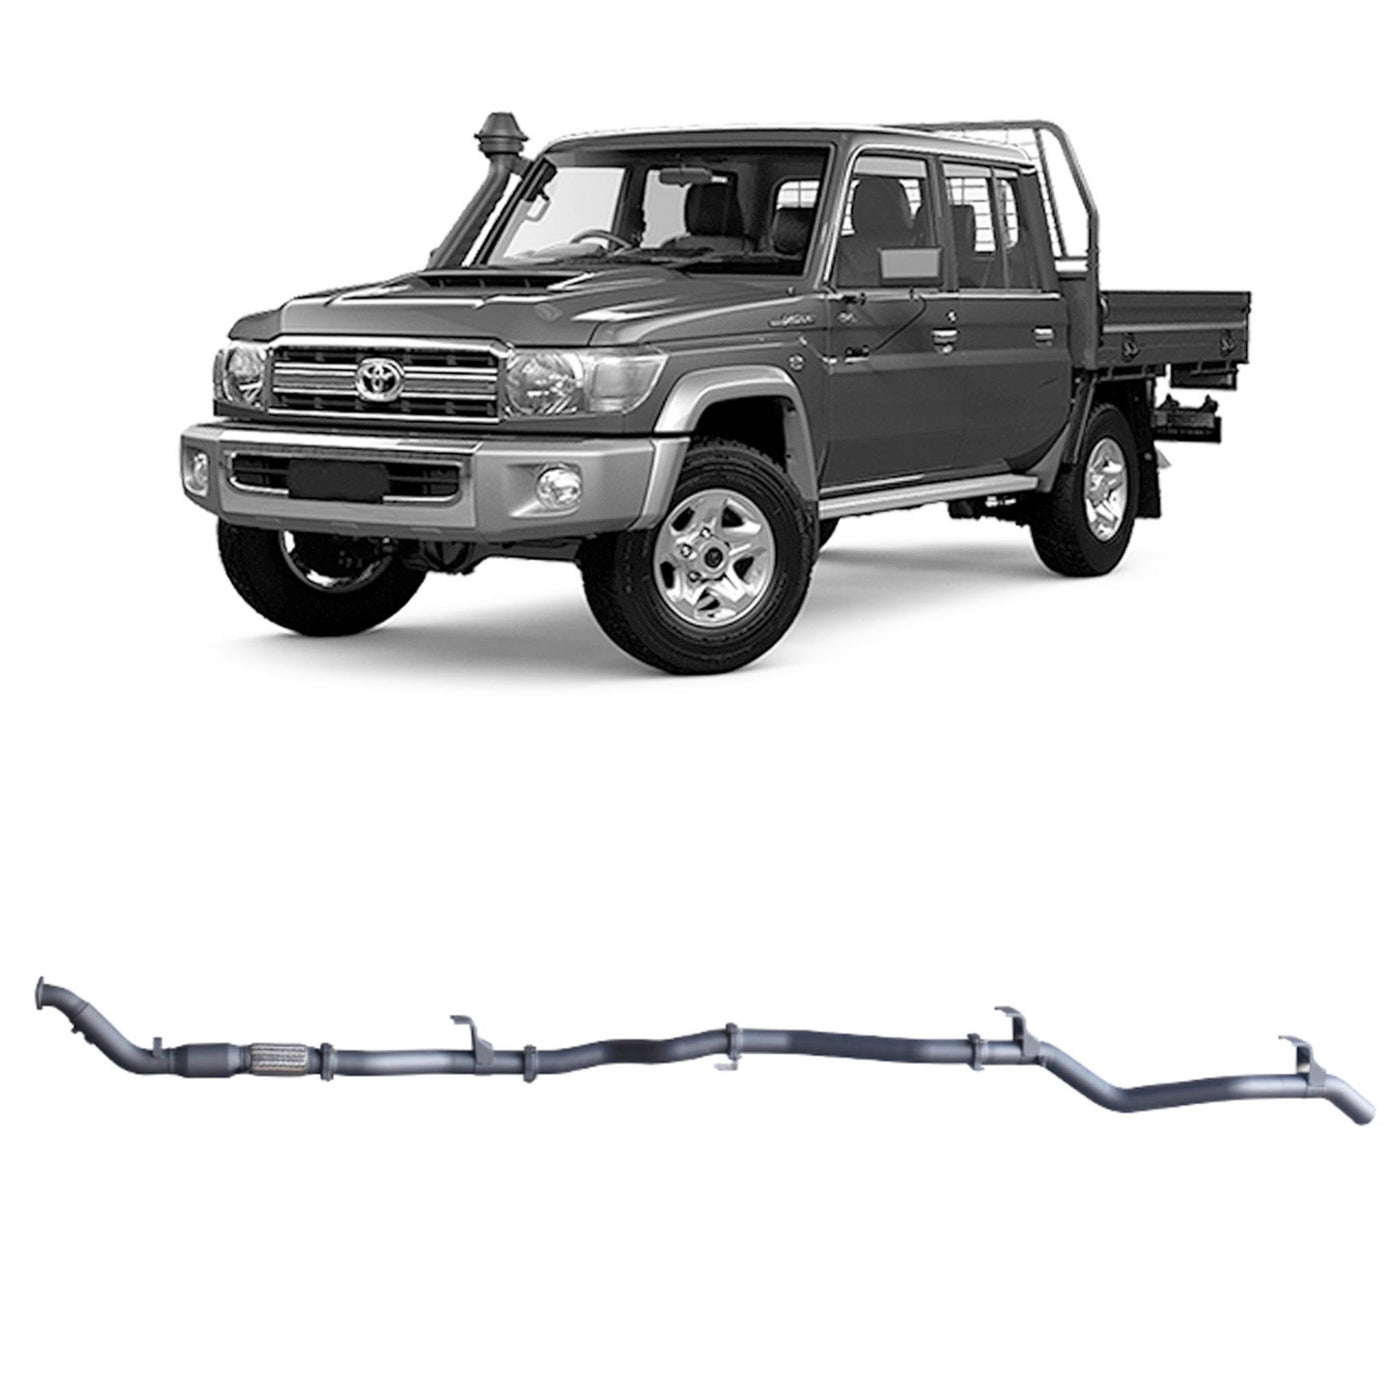 Redback Extreme Duty Exhaust Suitable For Toyota Landcruiser 79 Series Double Cab (01/2012 - 10/2016) - OZI4X4 PTY LTD